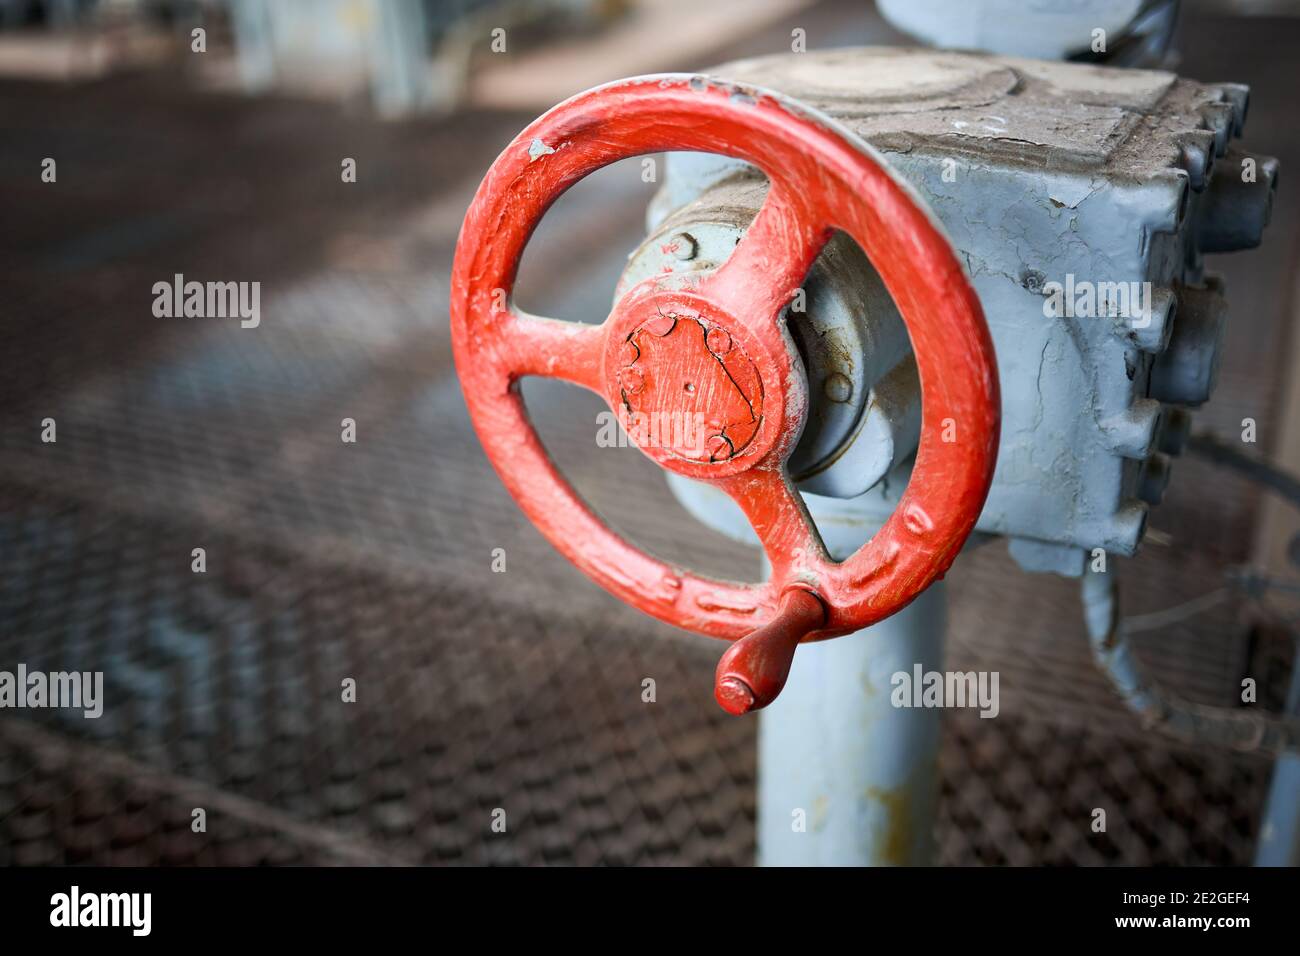 Old rusty steampunk electro valve wheel painted red paint swellings peeling selective focus with handle grip over out of focus background floor and Stock Photo